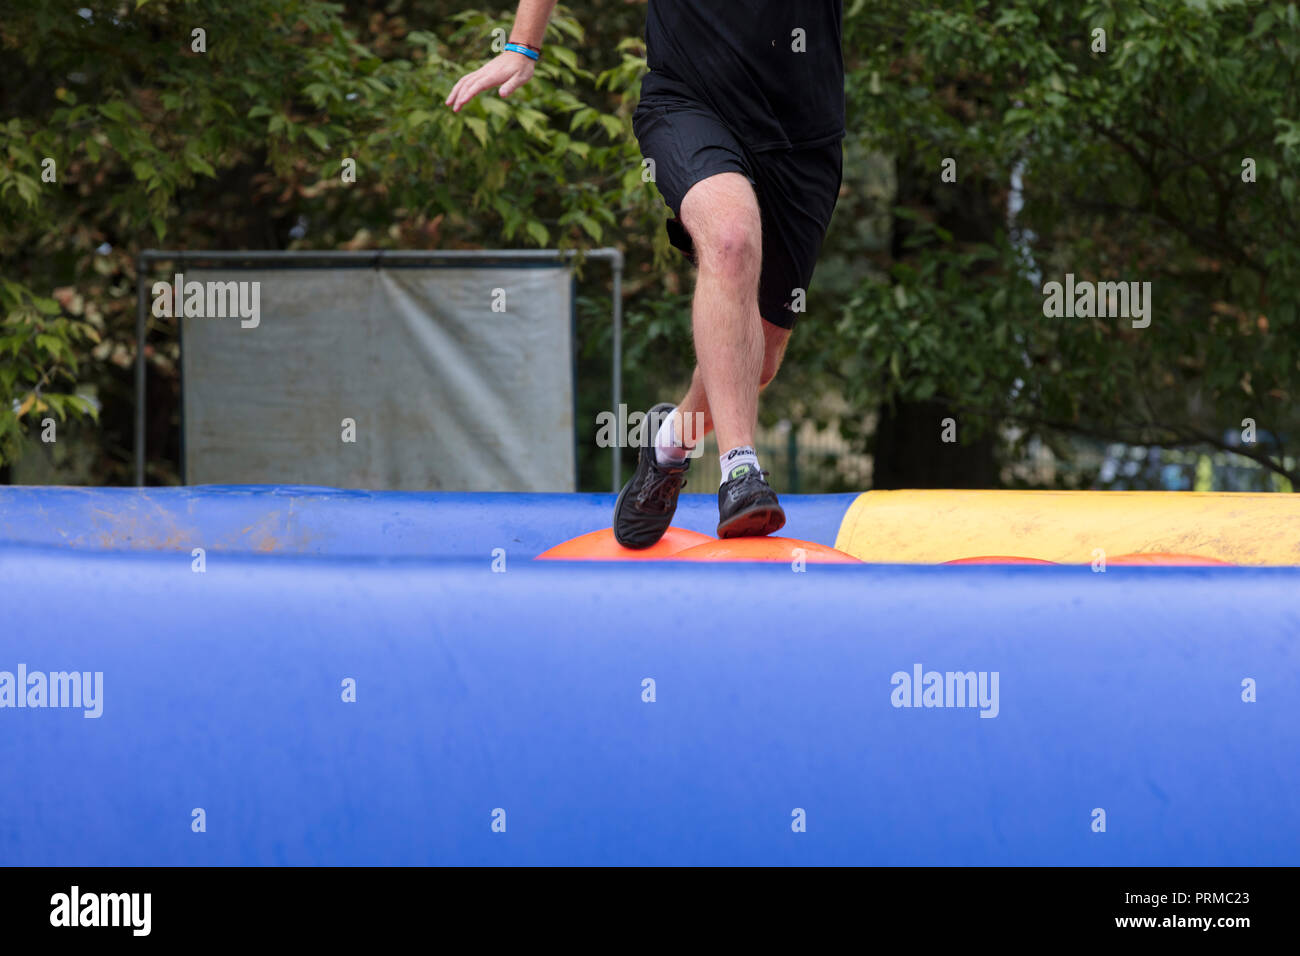 Participant tackles an adventure obstacle course race Stock Photo